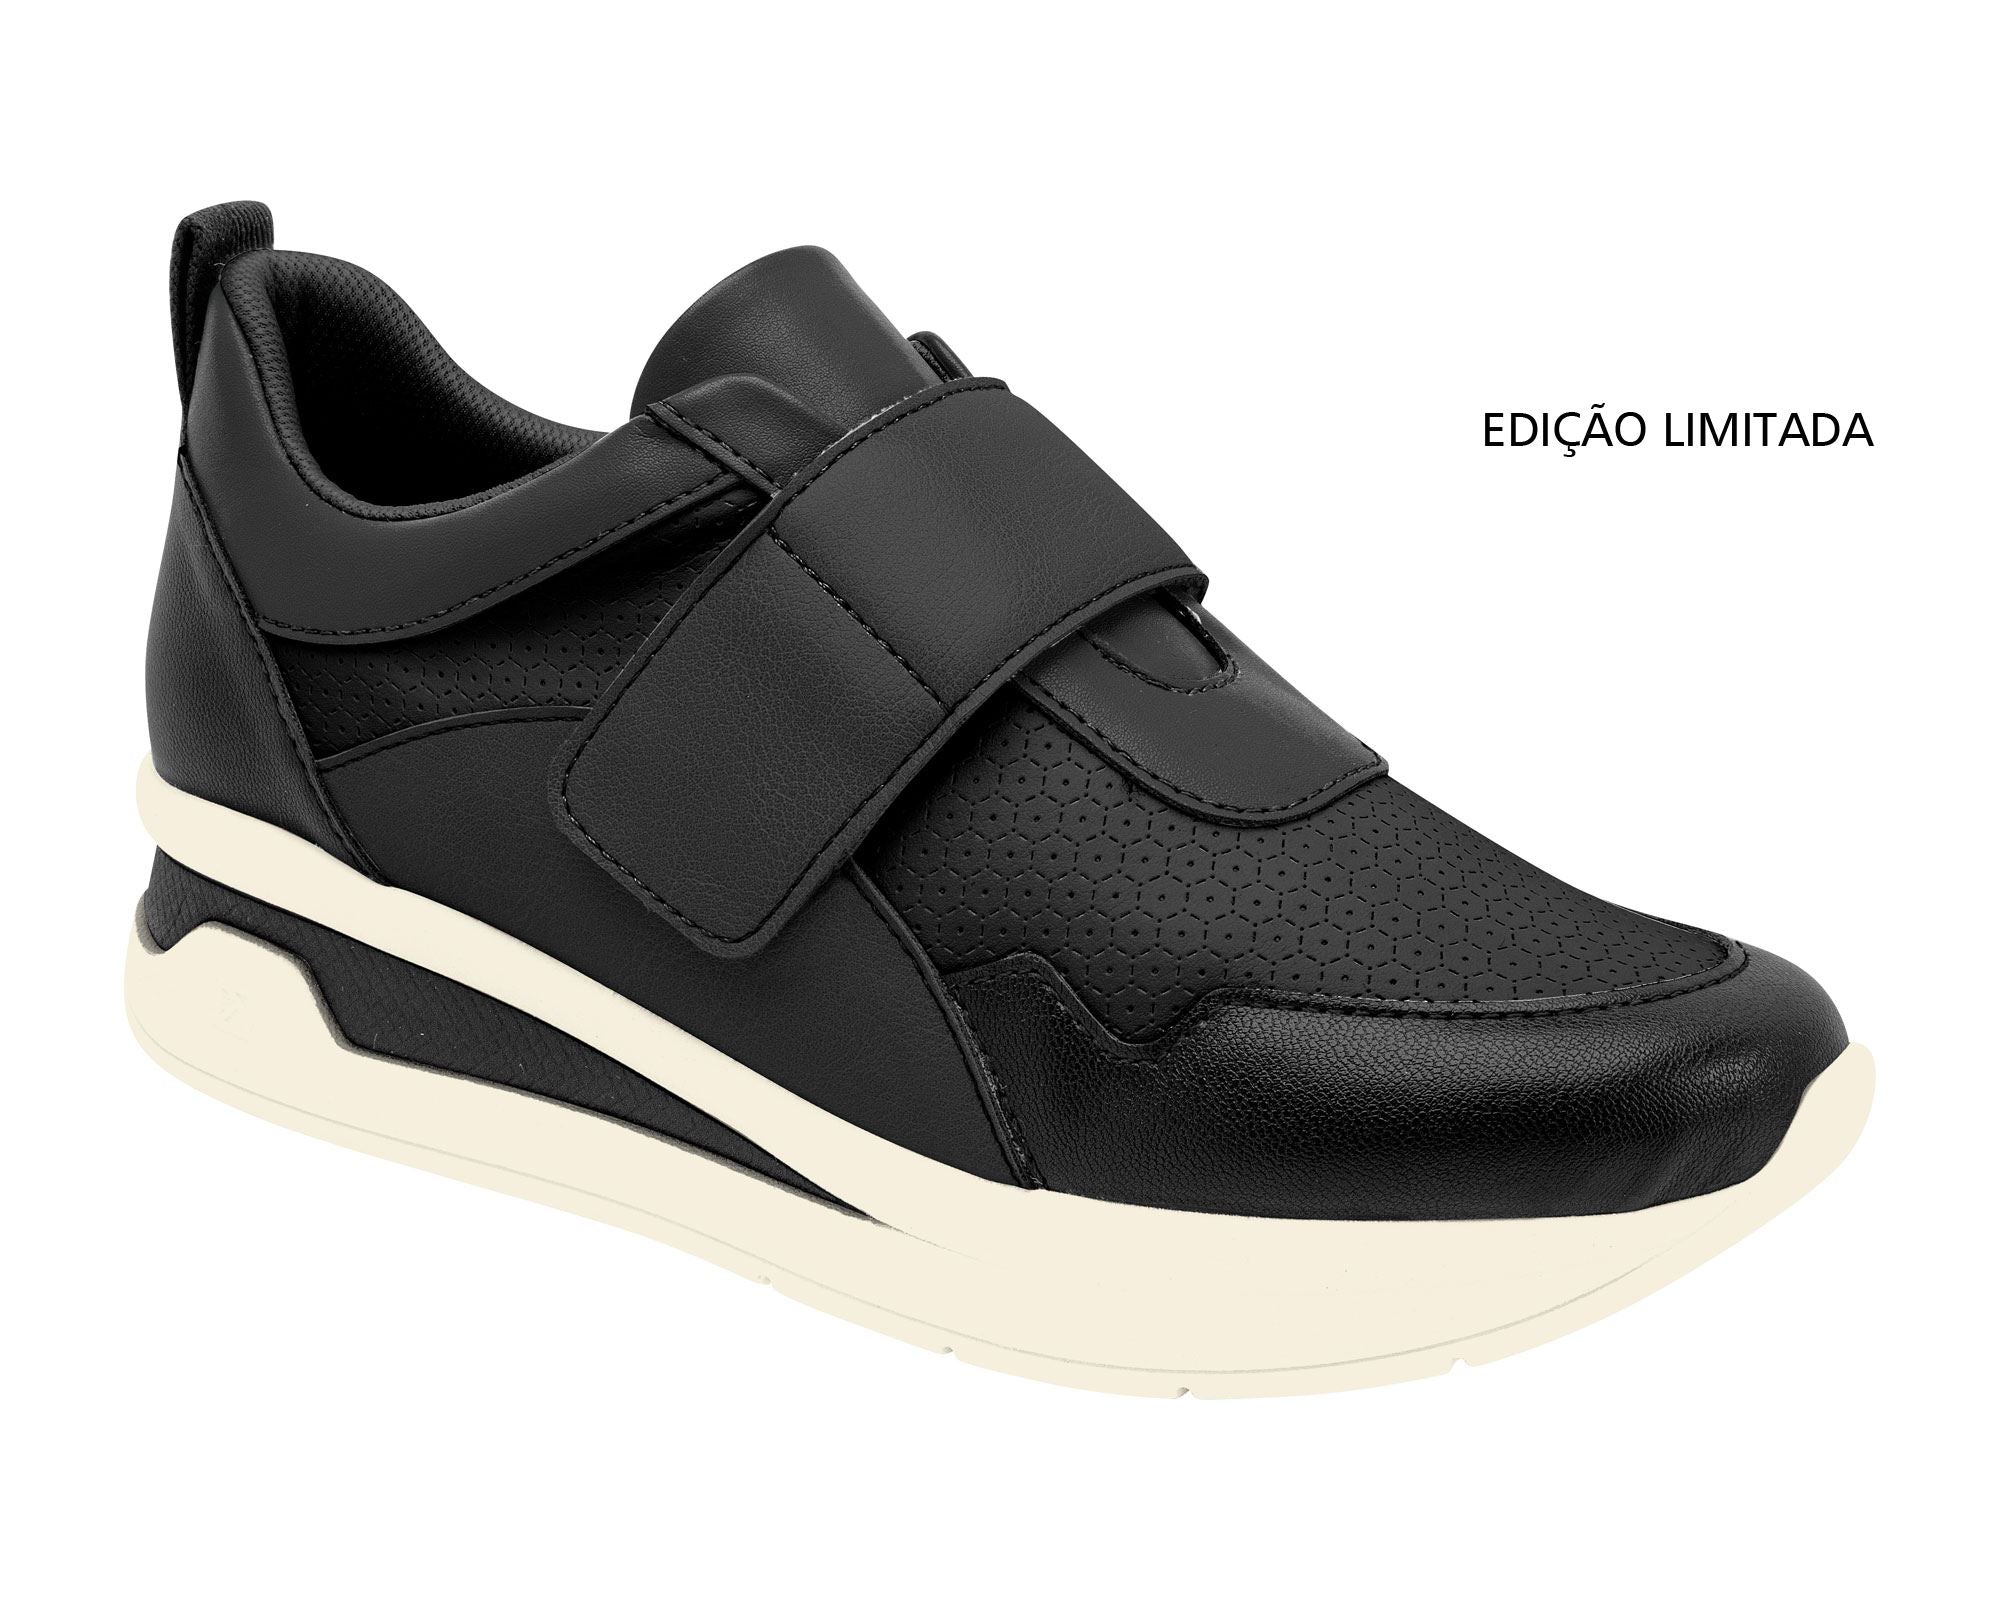 Tenis Mujer Piccadilly Ref. 996025